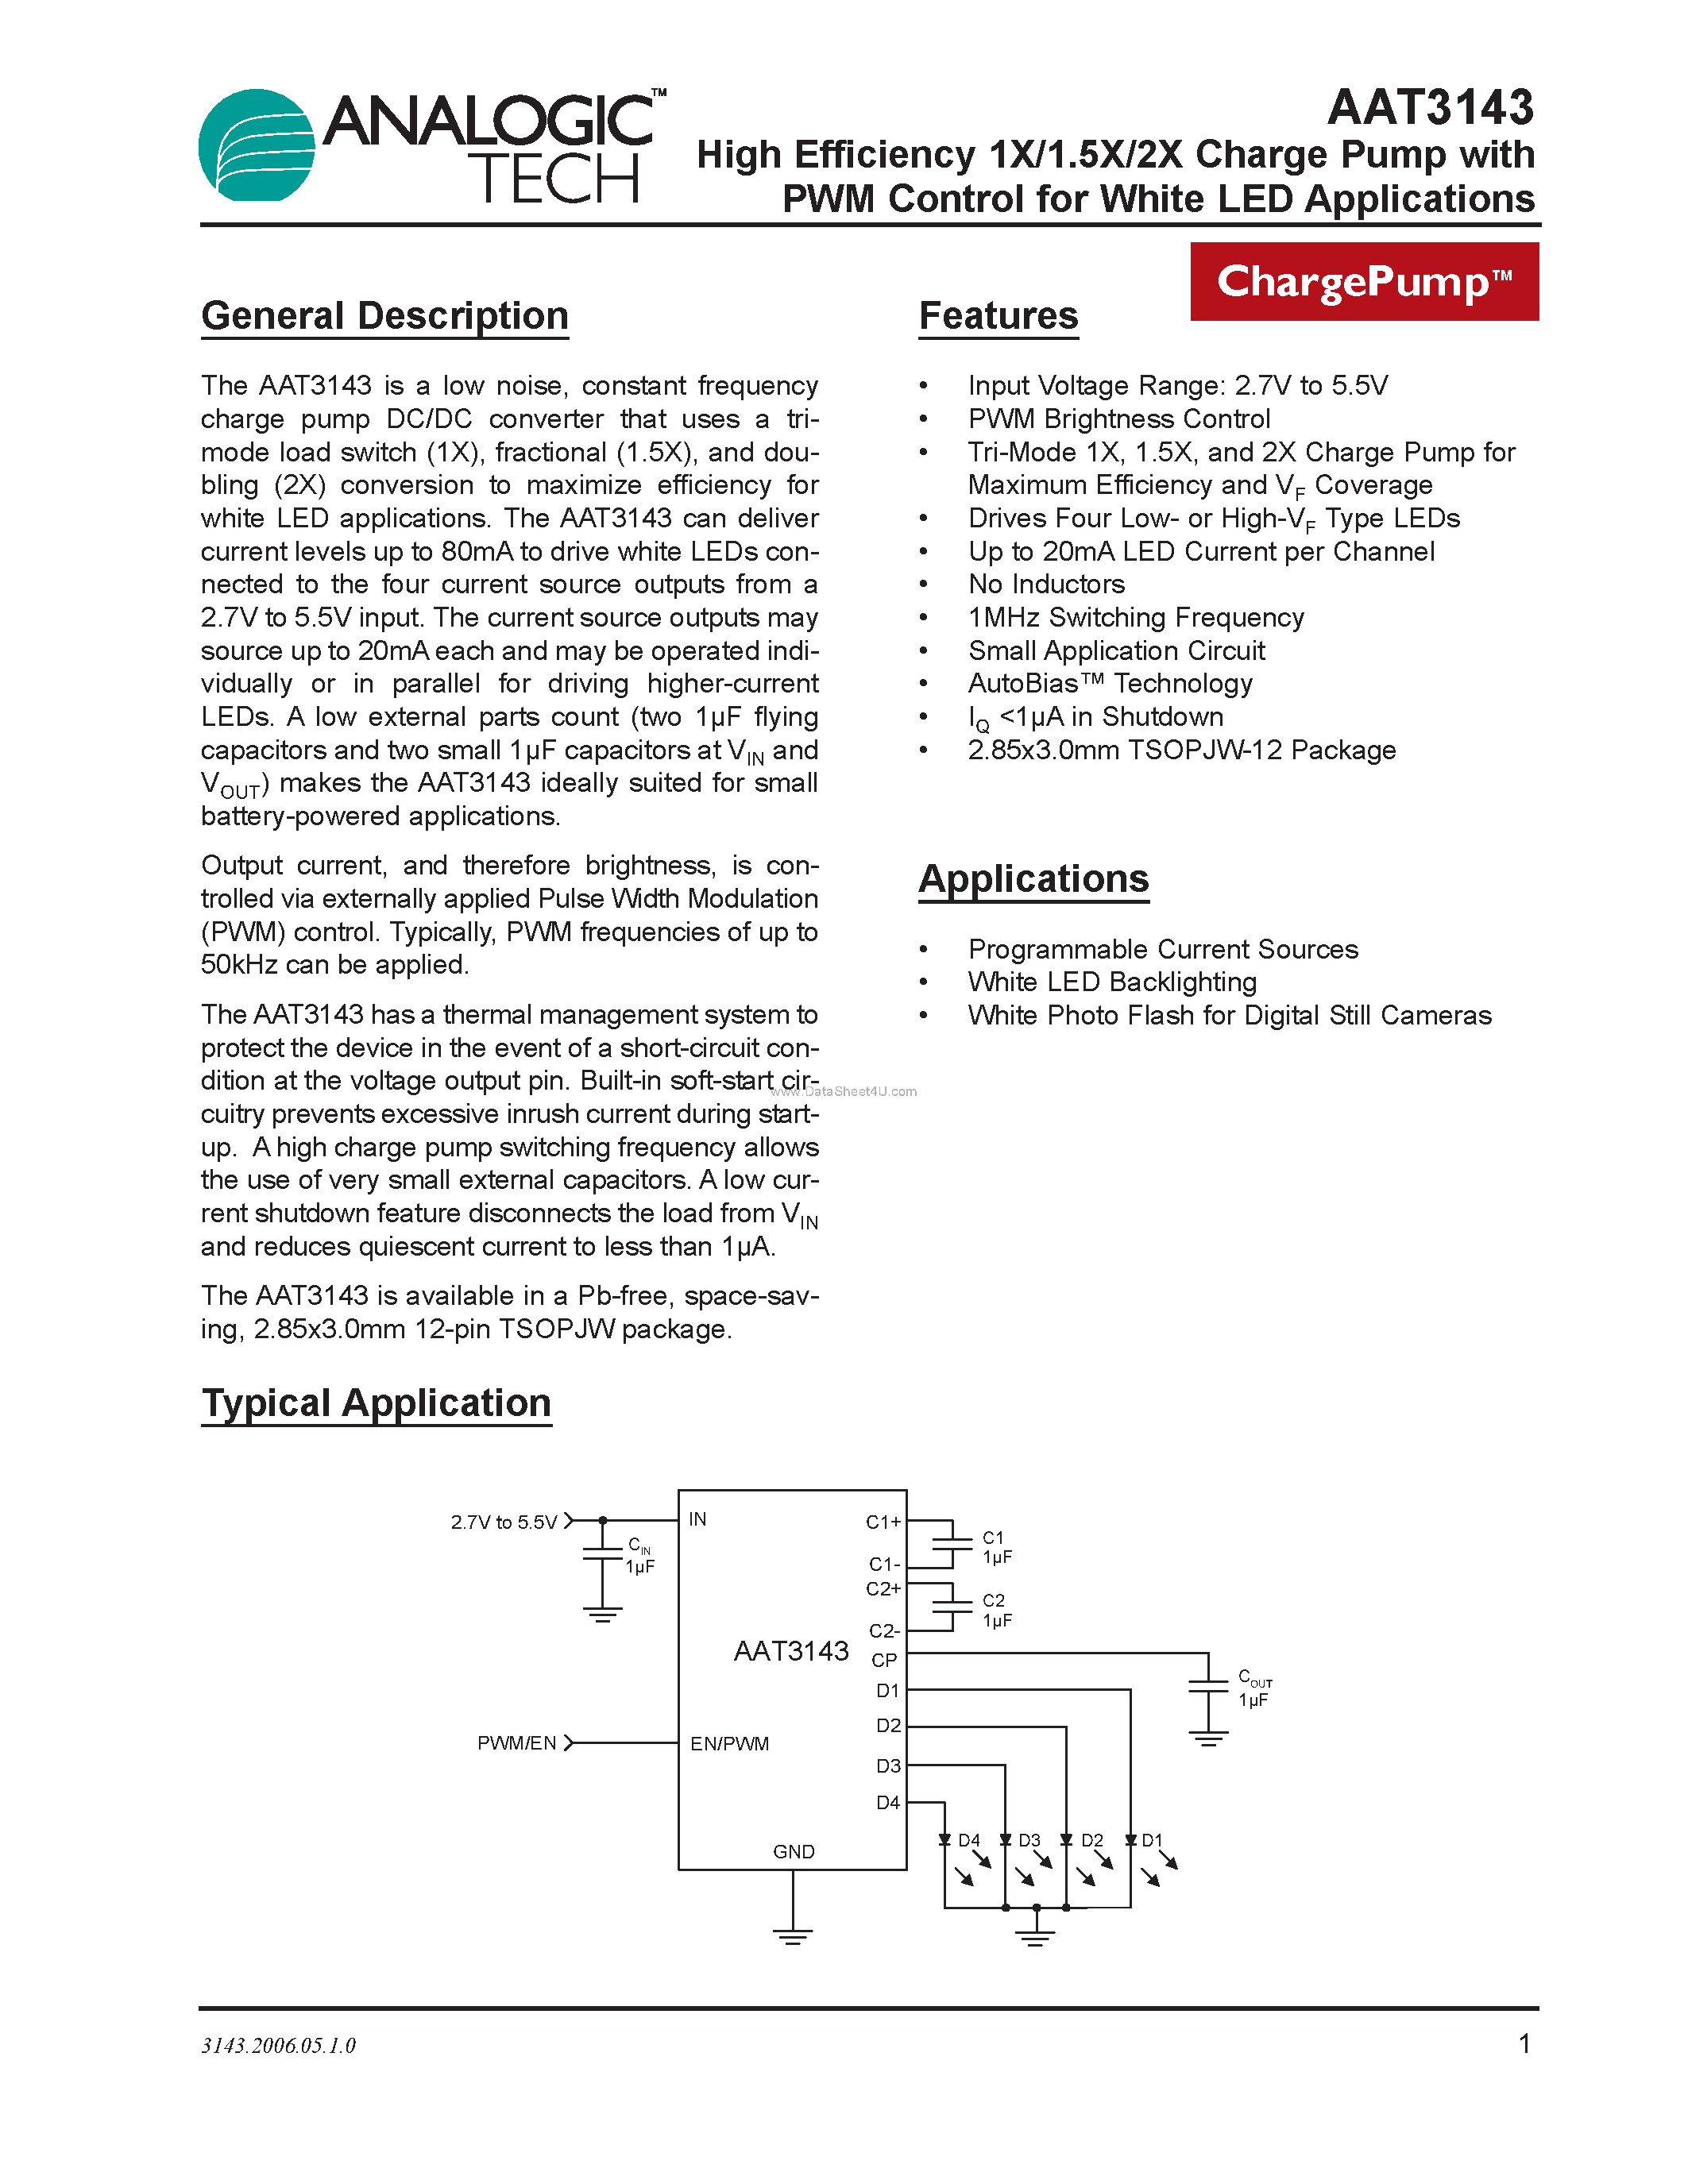 Datasheet AAT3143 - High Efficiency 1X/1.5X/2X Charge Pump page 1